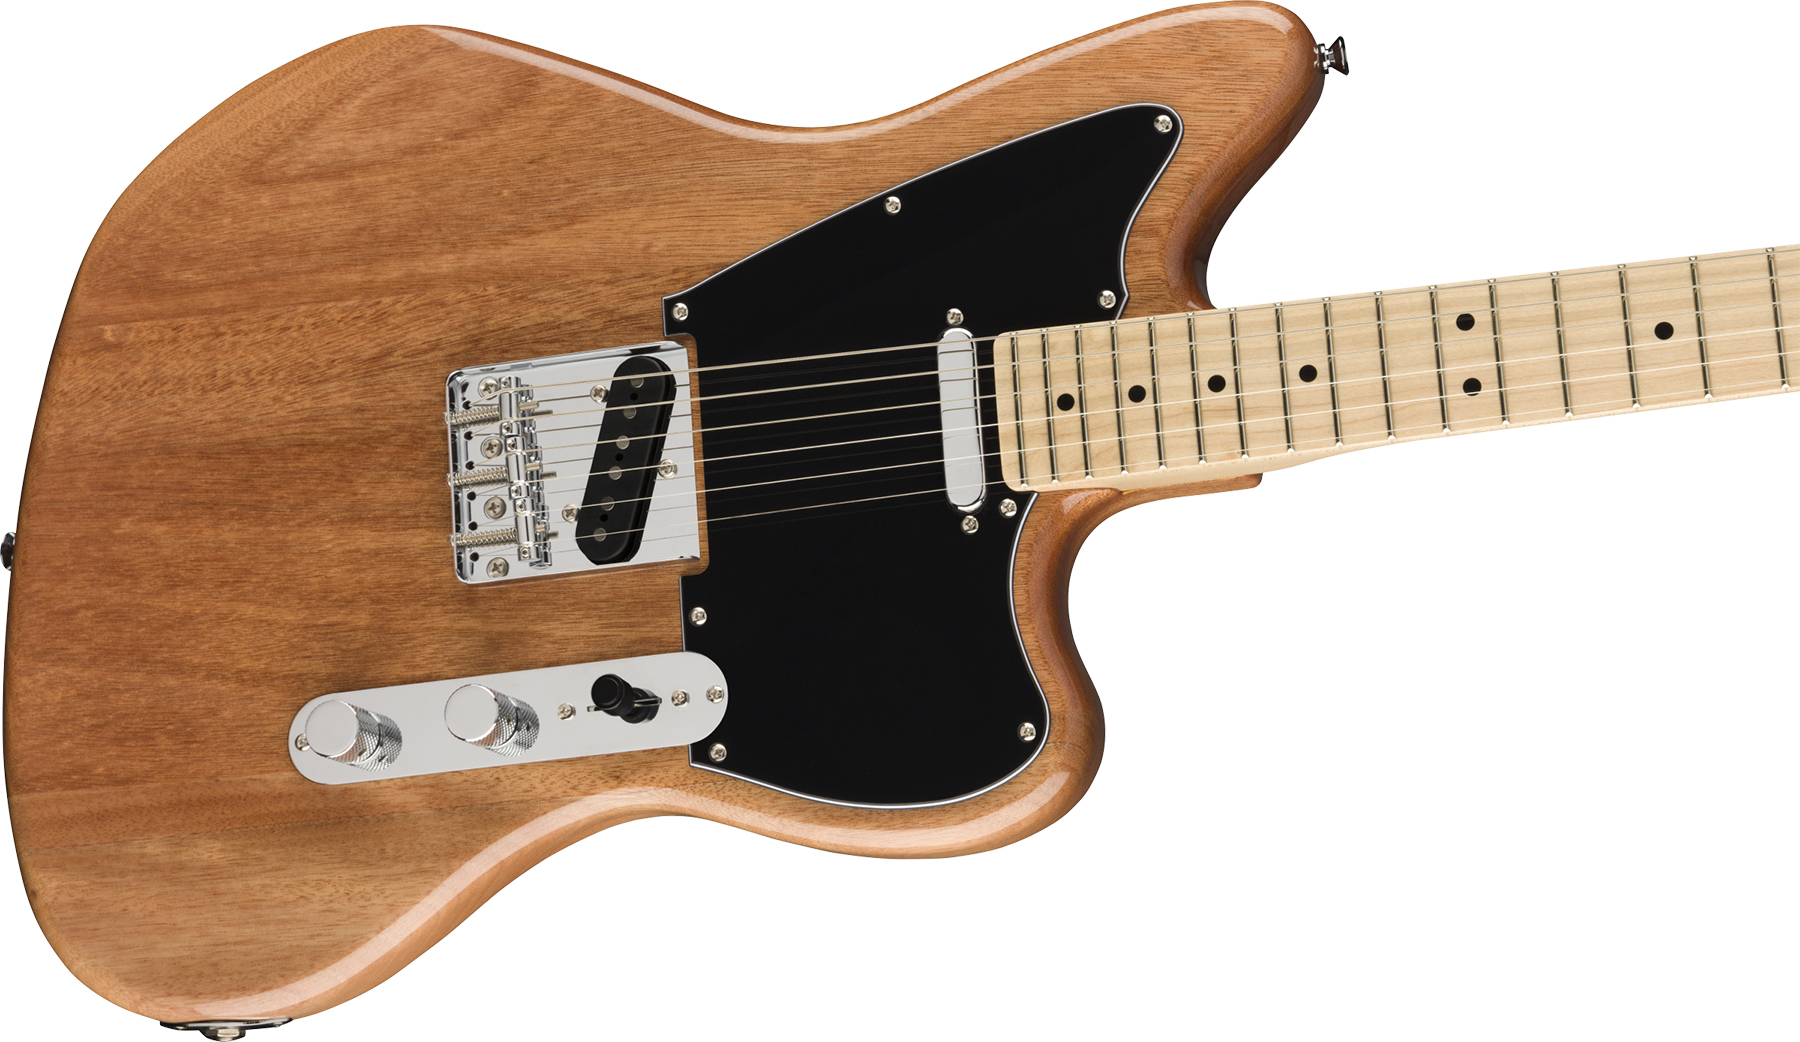 Squier Tele Offset Paranormal Ss Ht Mn - Natural - Retro rock electric guitar - Variation 2